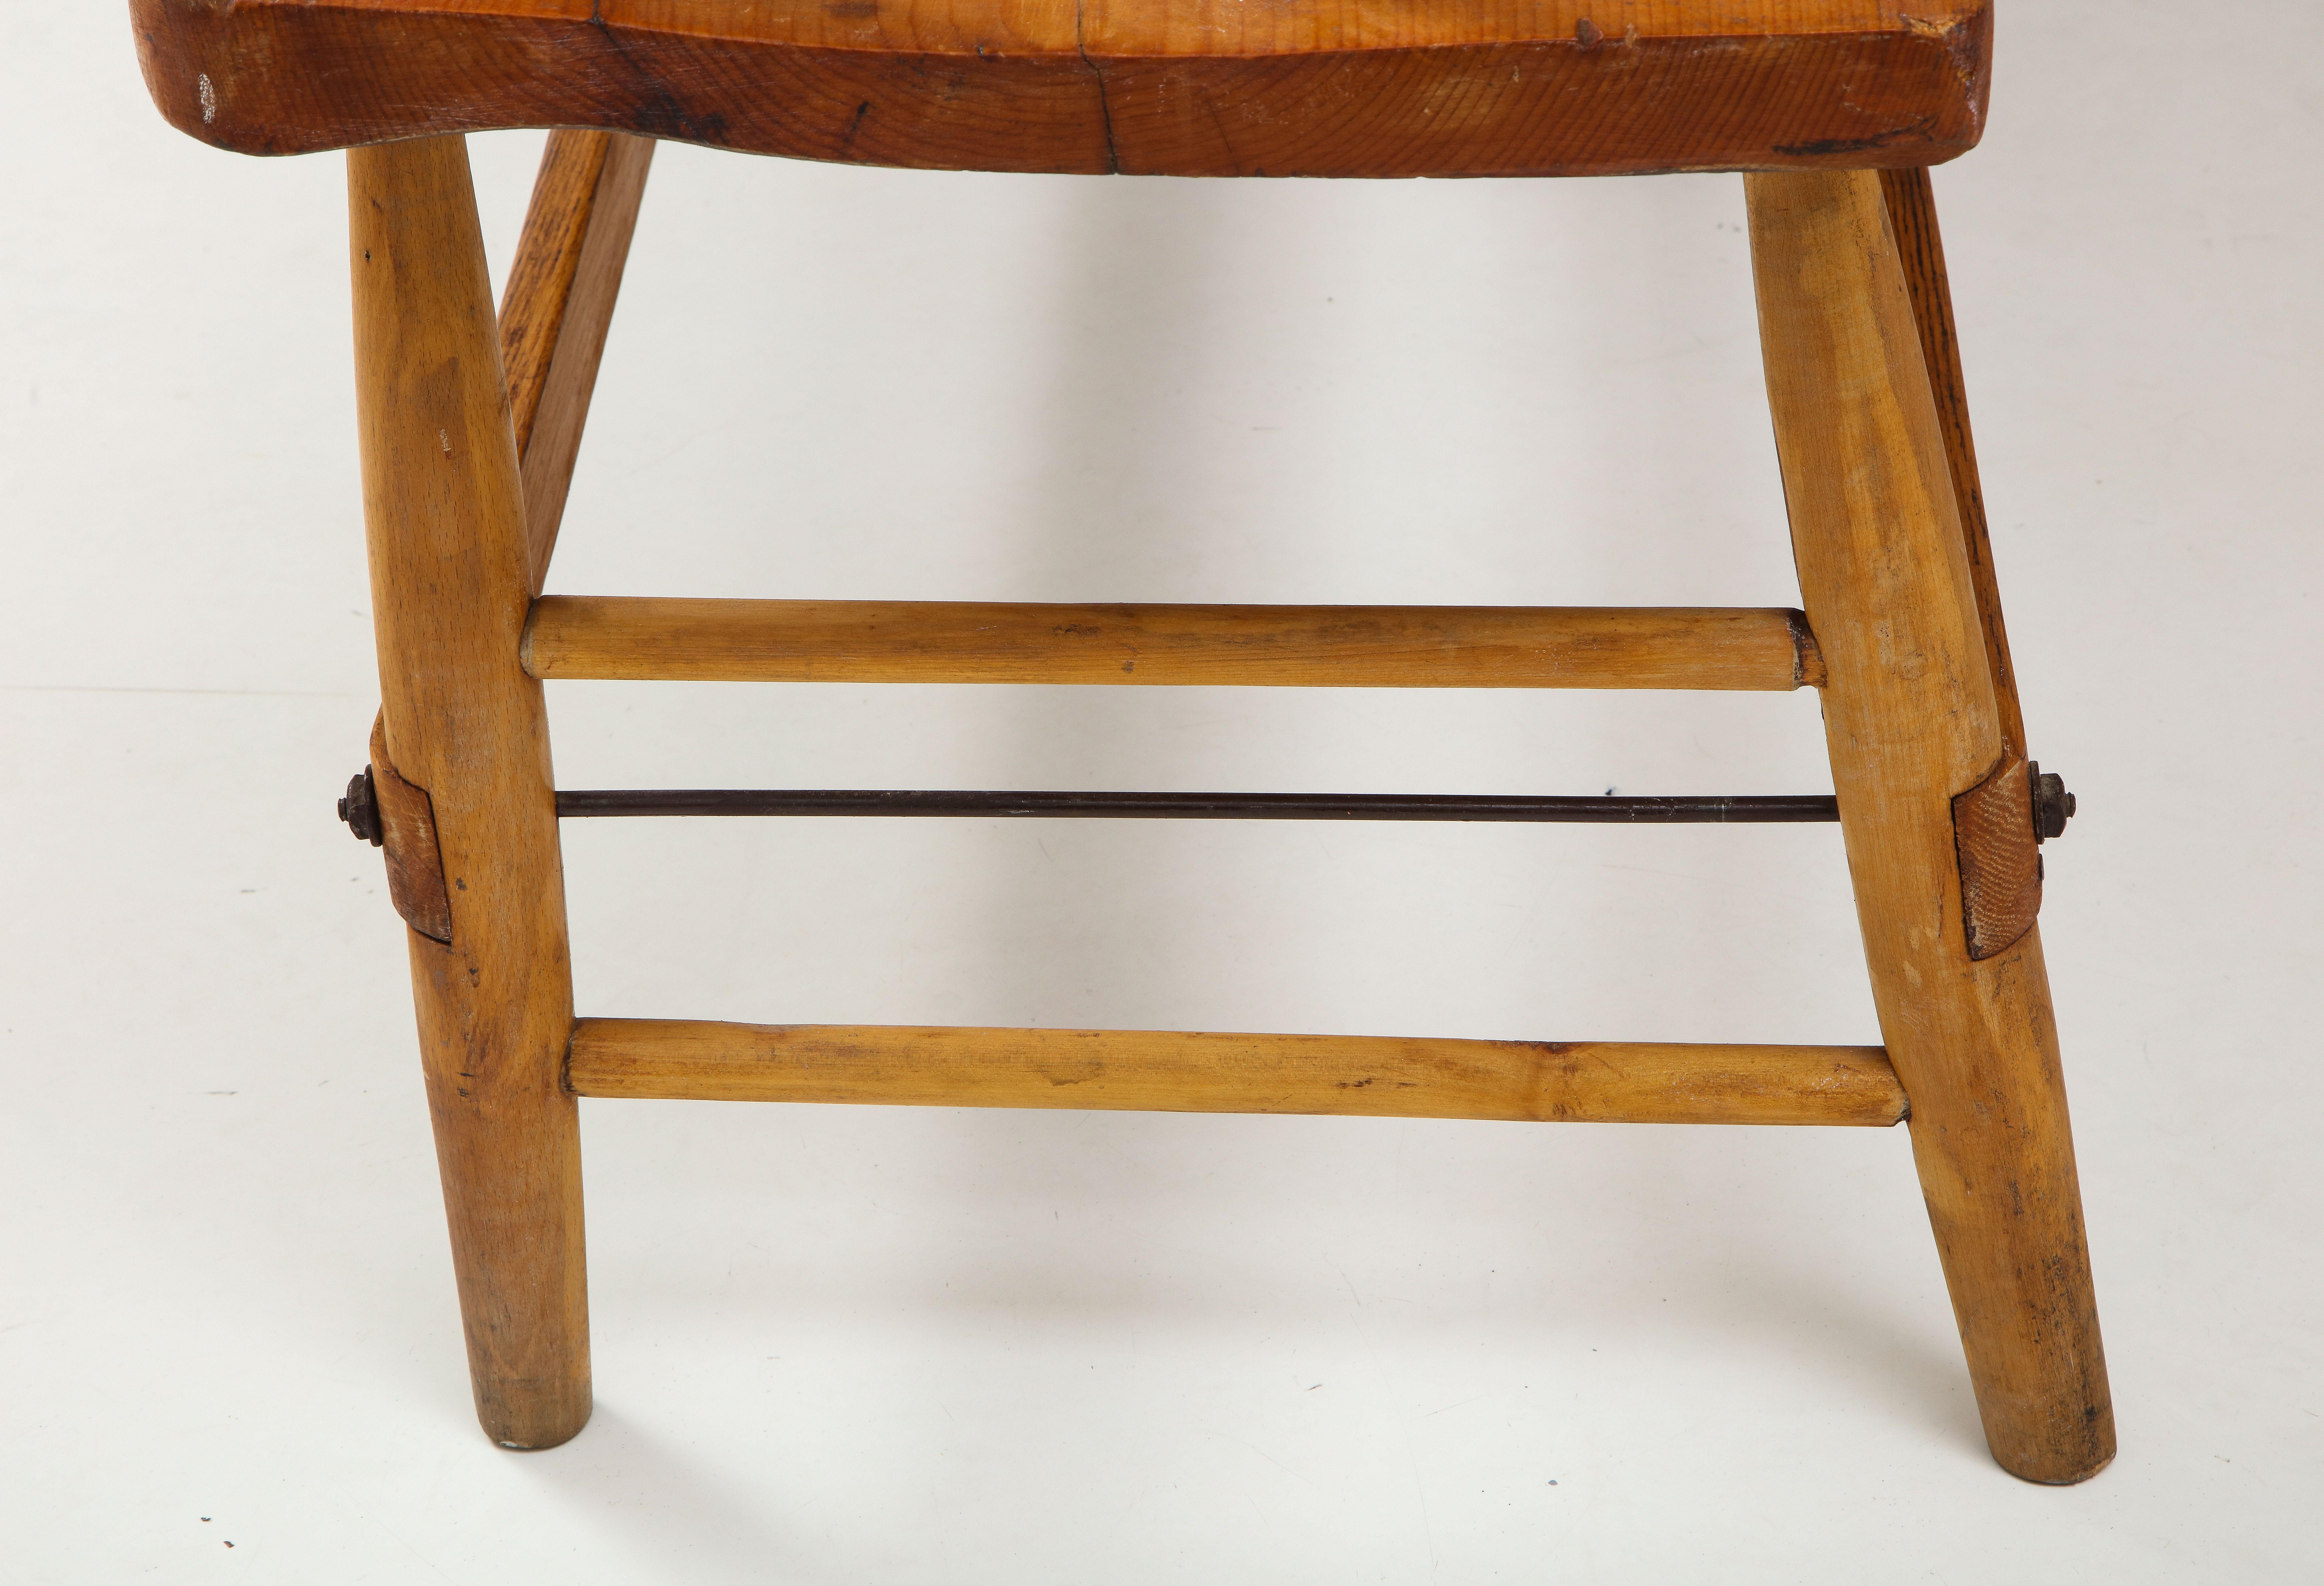 Exceptional 19th C. Hand Made Quaker Meeting House Bench, New England/Cape Cod 4